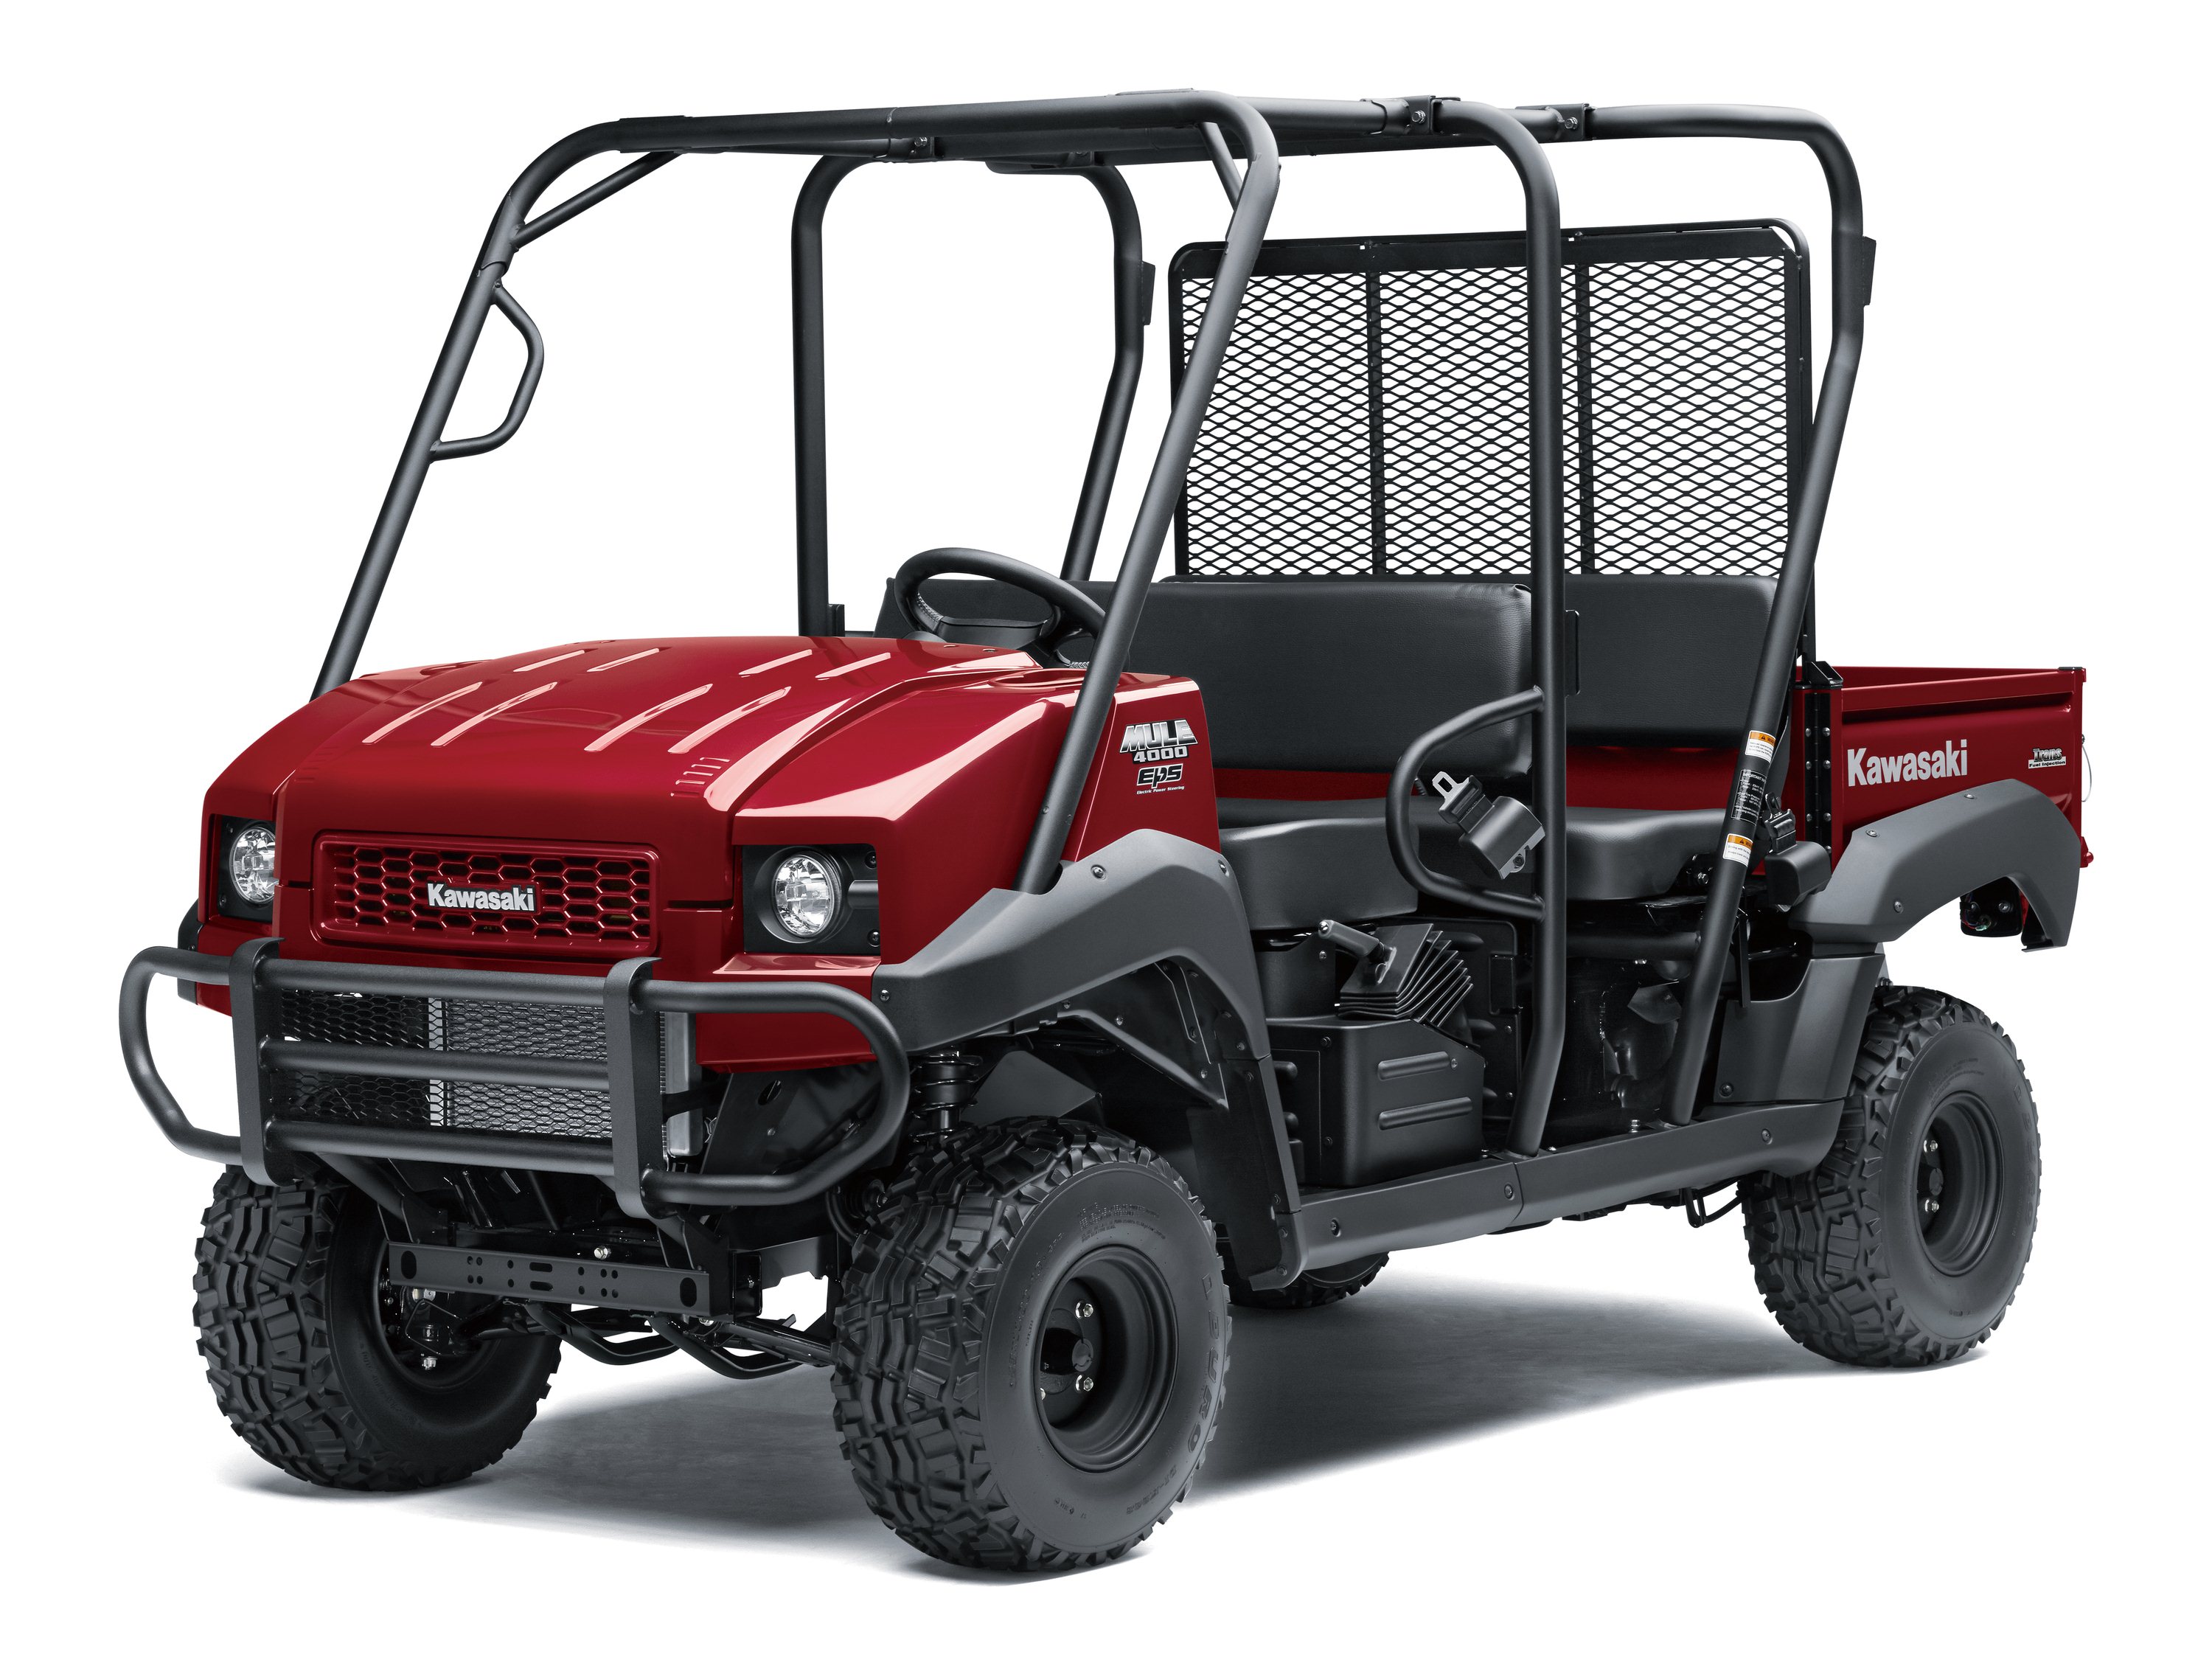 Looking for a used UTV?